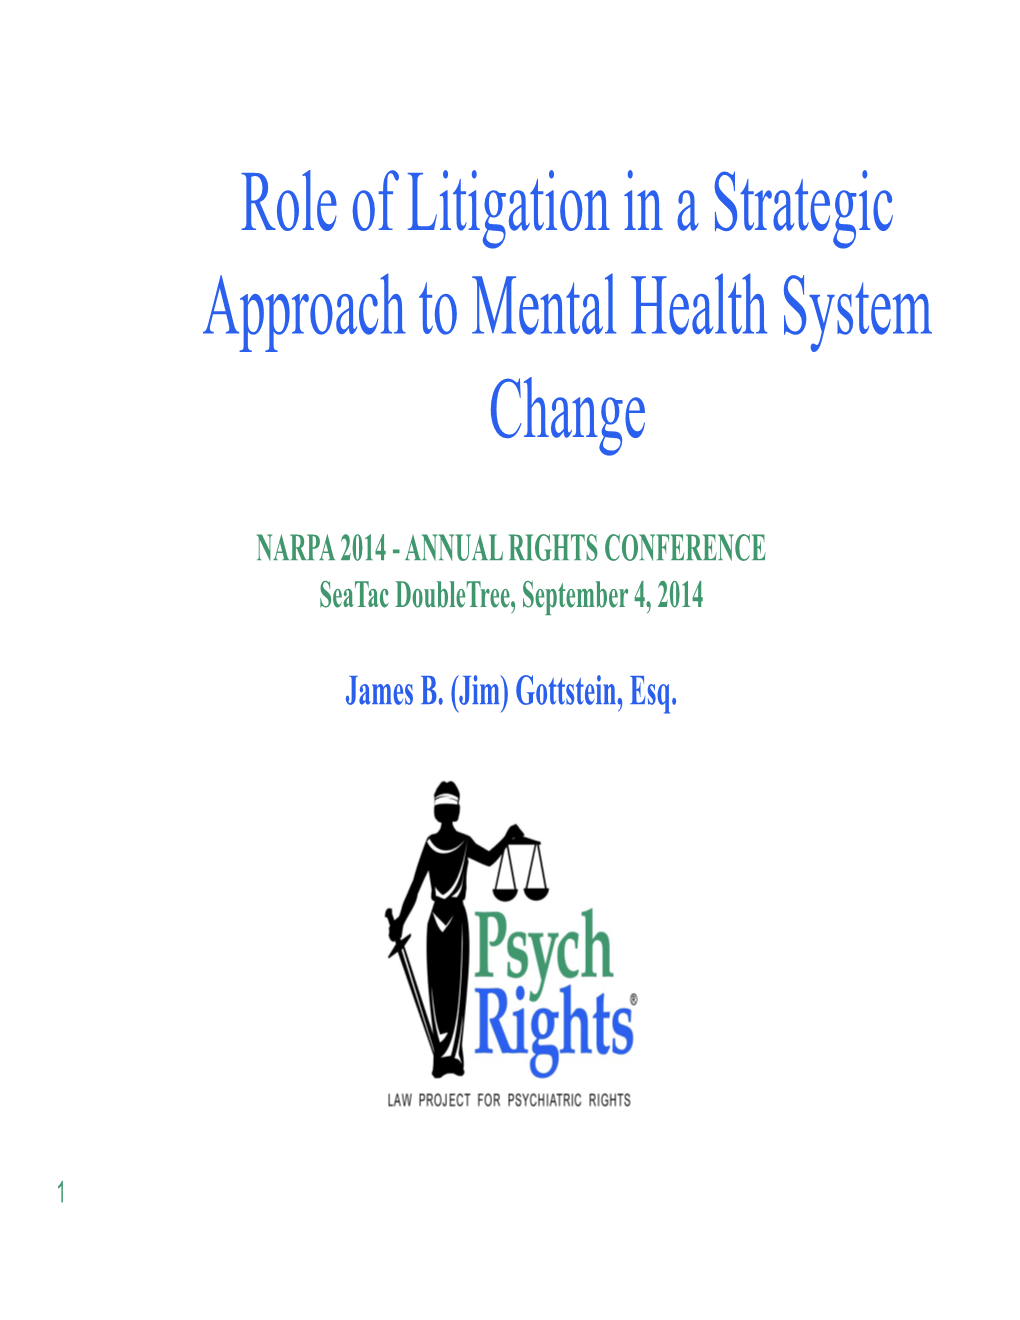 Role of Litigation in a Strategic Approach to Mental Health System Change